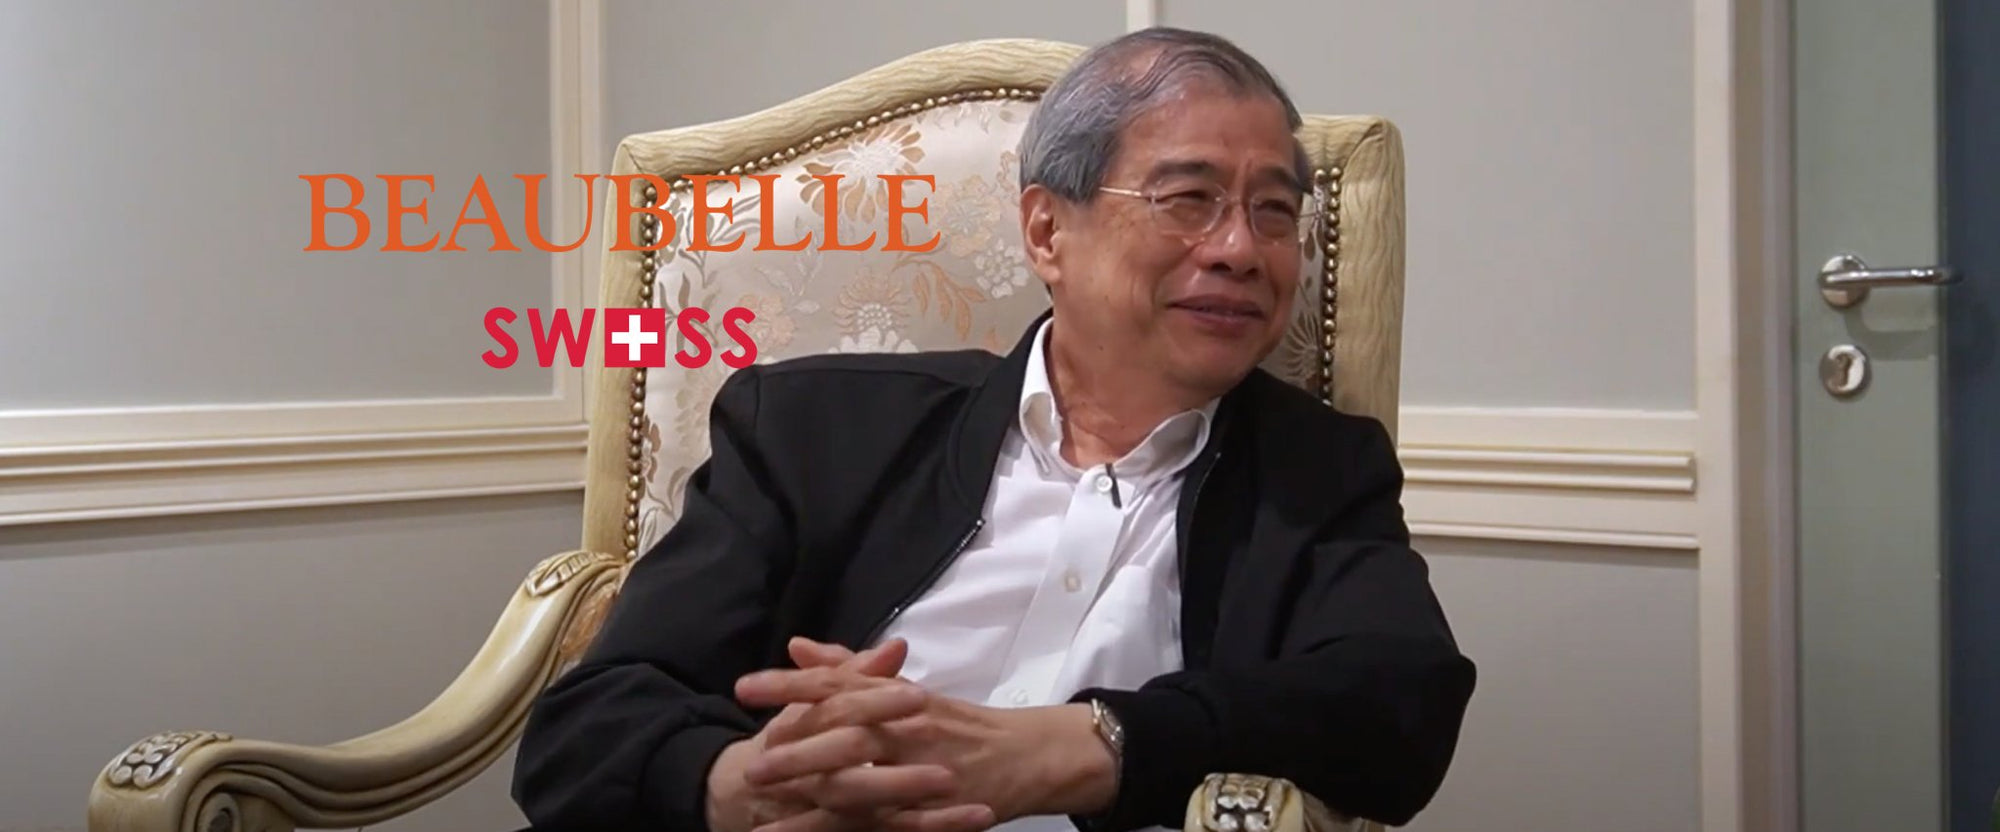 Datuk Andrew Lim's Insights on Mental Health - Beaubelle Asia-Pacific